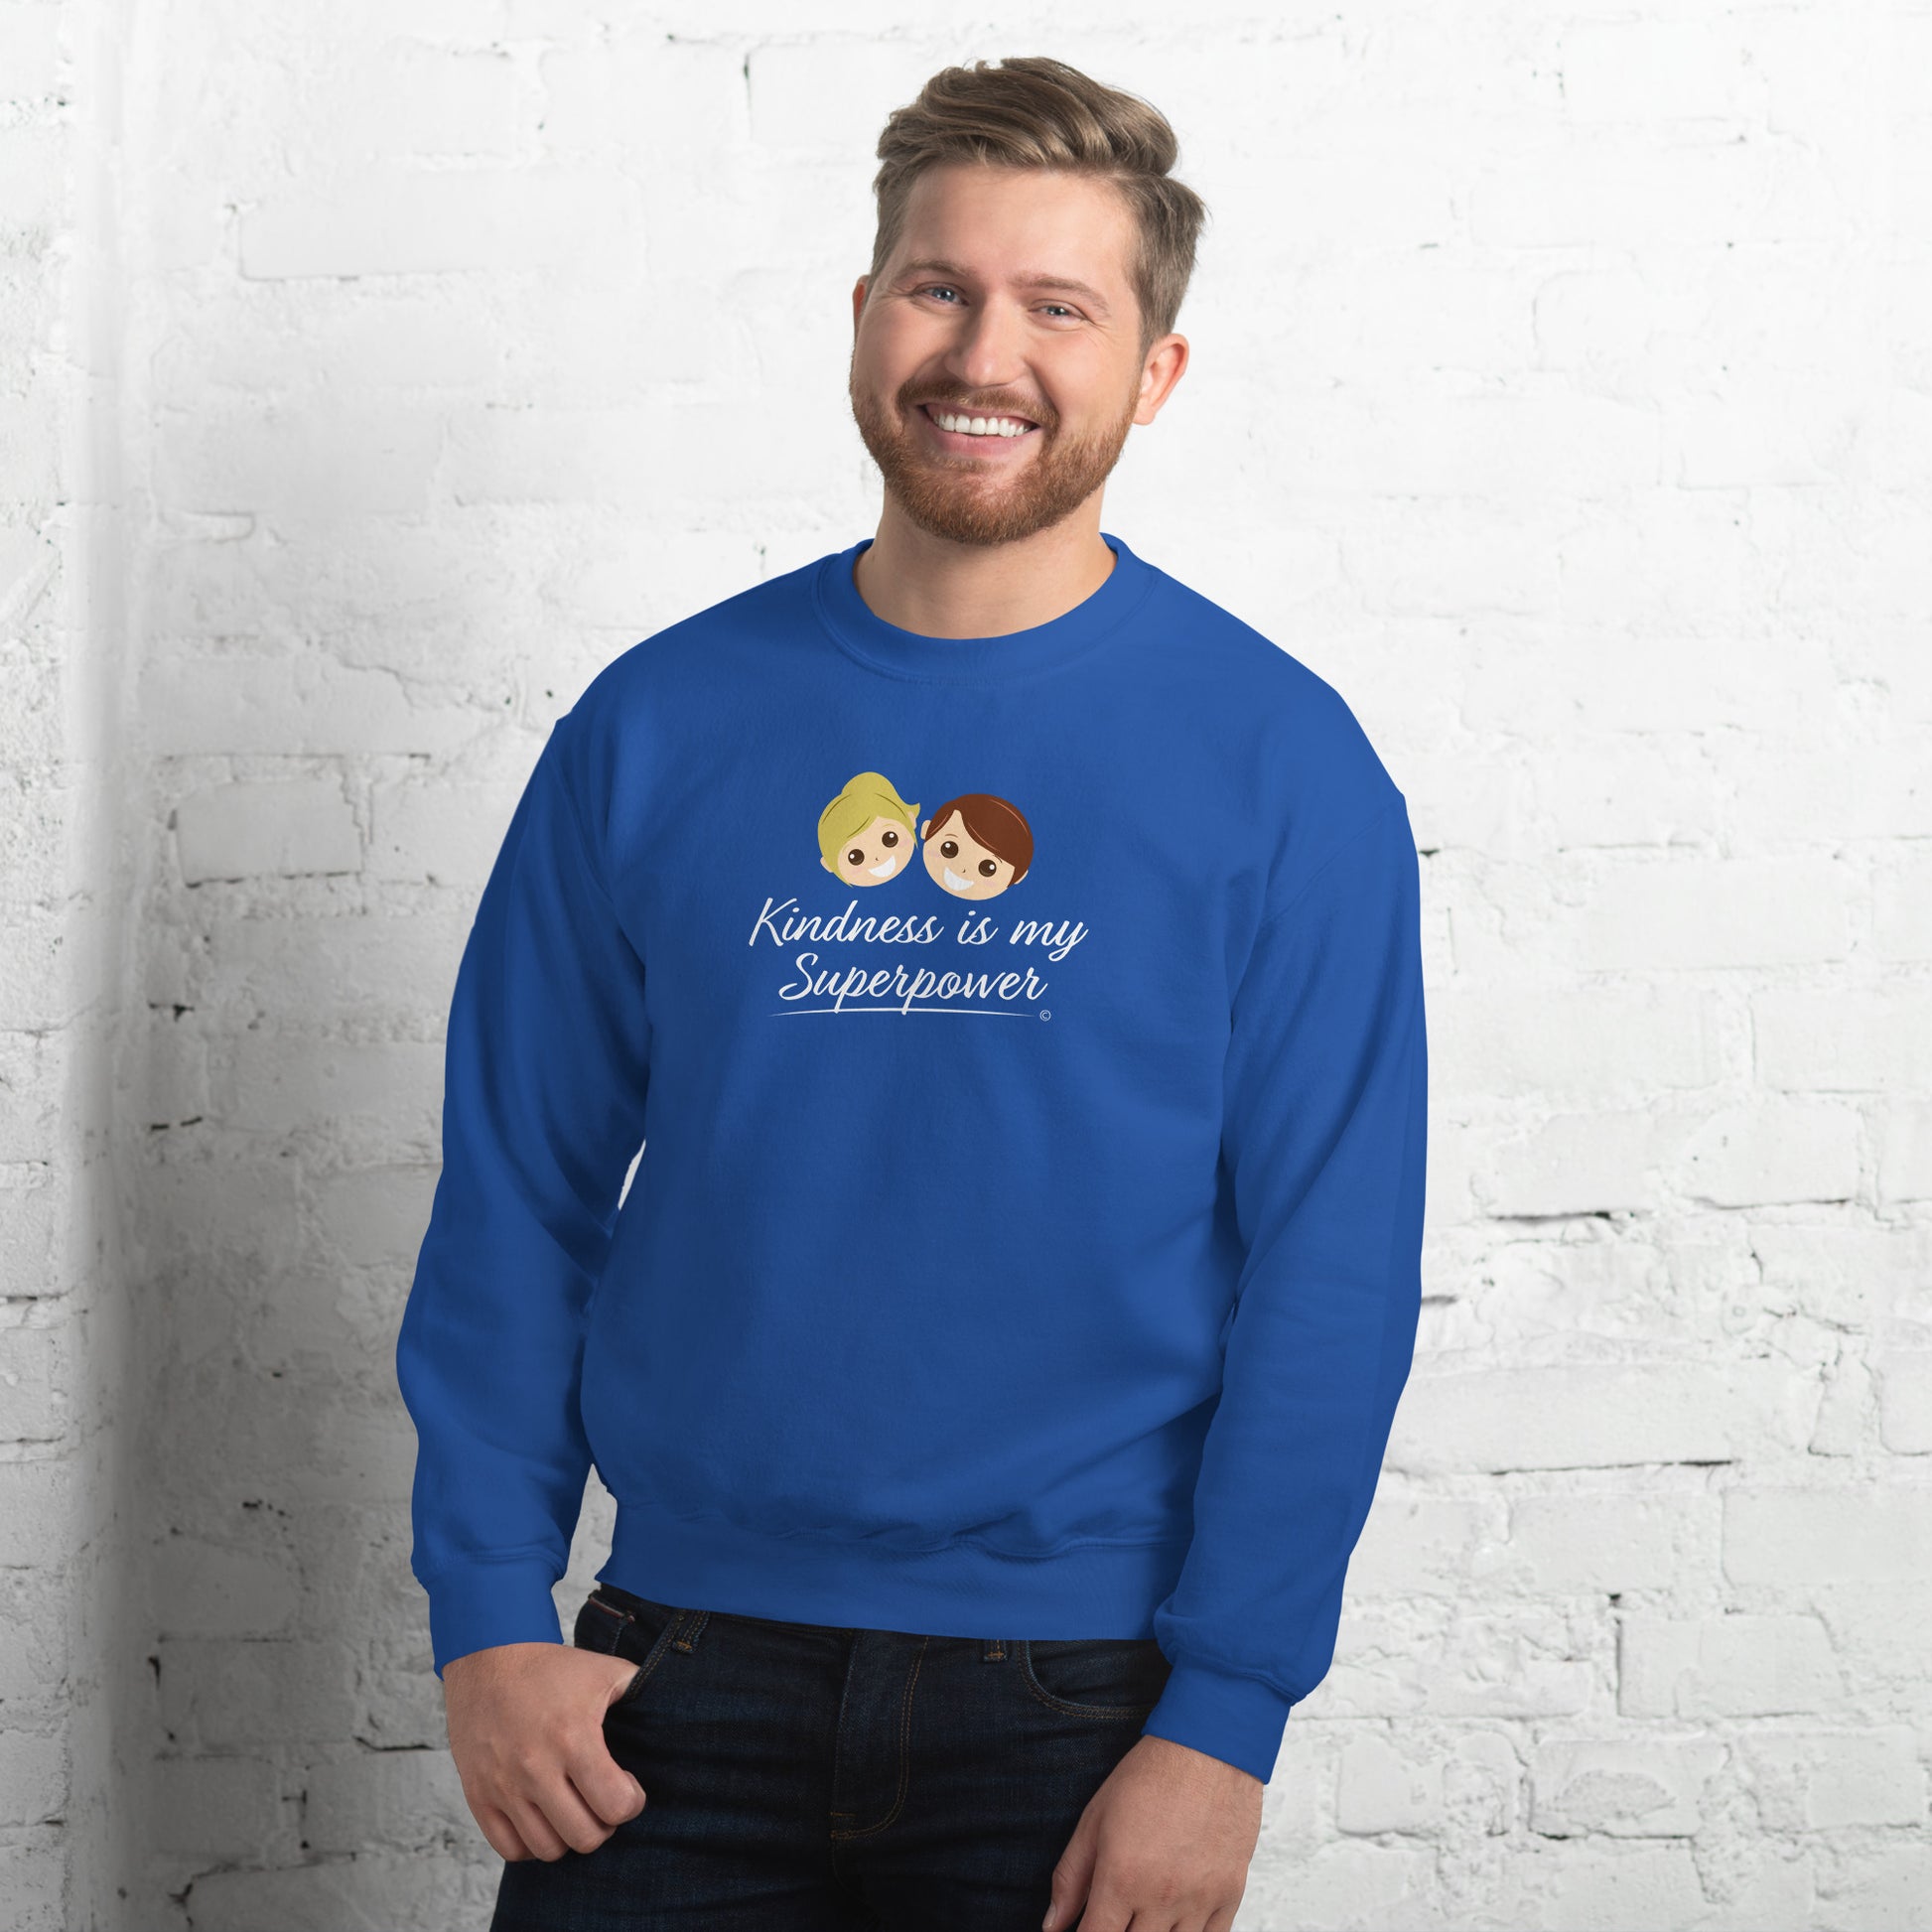 A stylish man confidently modeling a cozy unisex sweatshirt in royal blue, adorned with the empowering quote 'Kindness is my Superpower' in bold lettering.